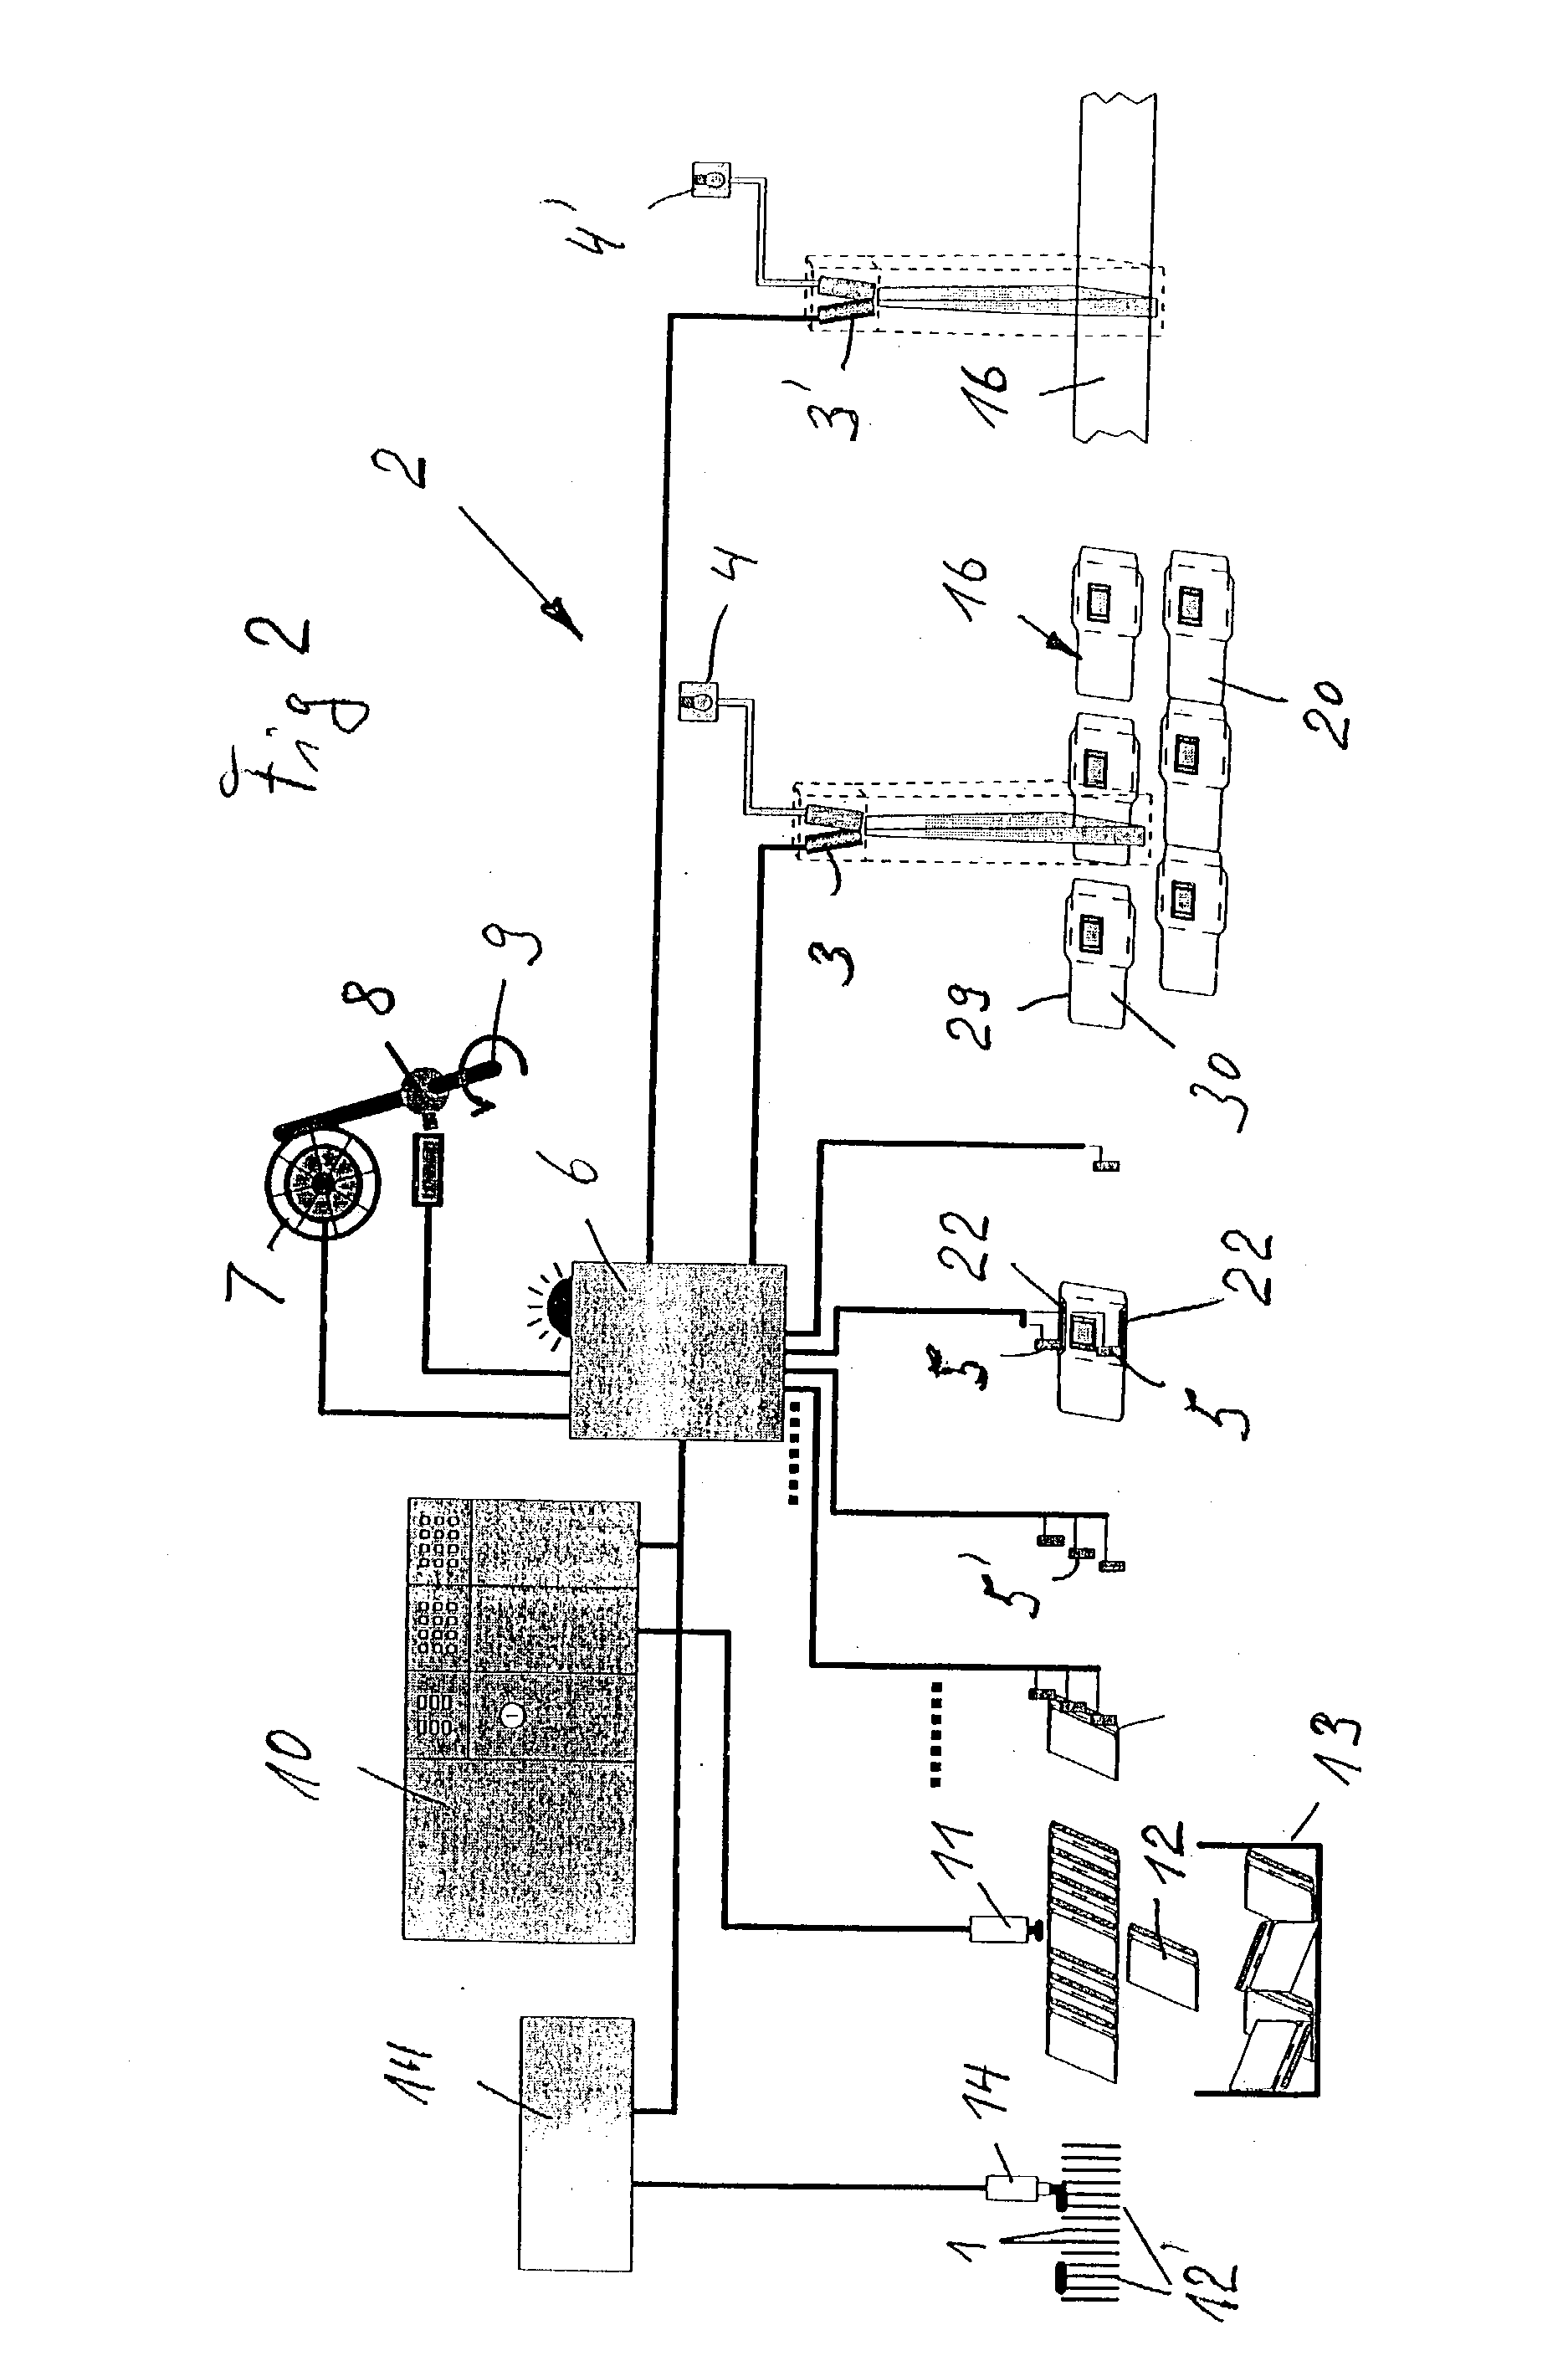 Method and apparatus for detecting product defects during the production of mailing products, hygiene products, or folded paper products